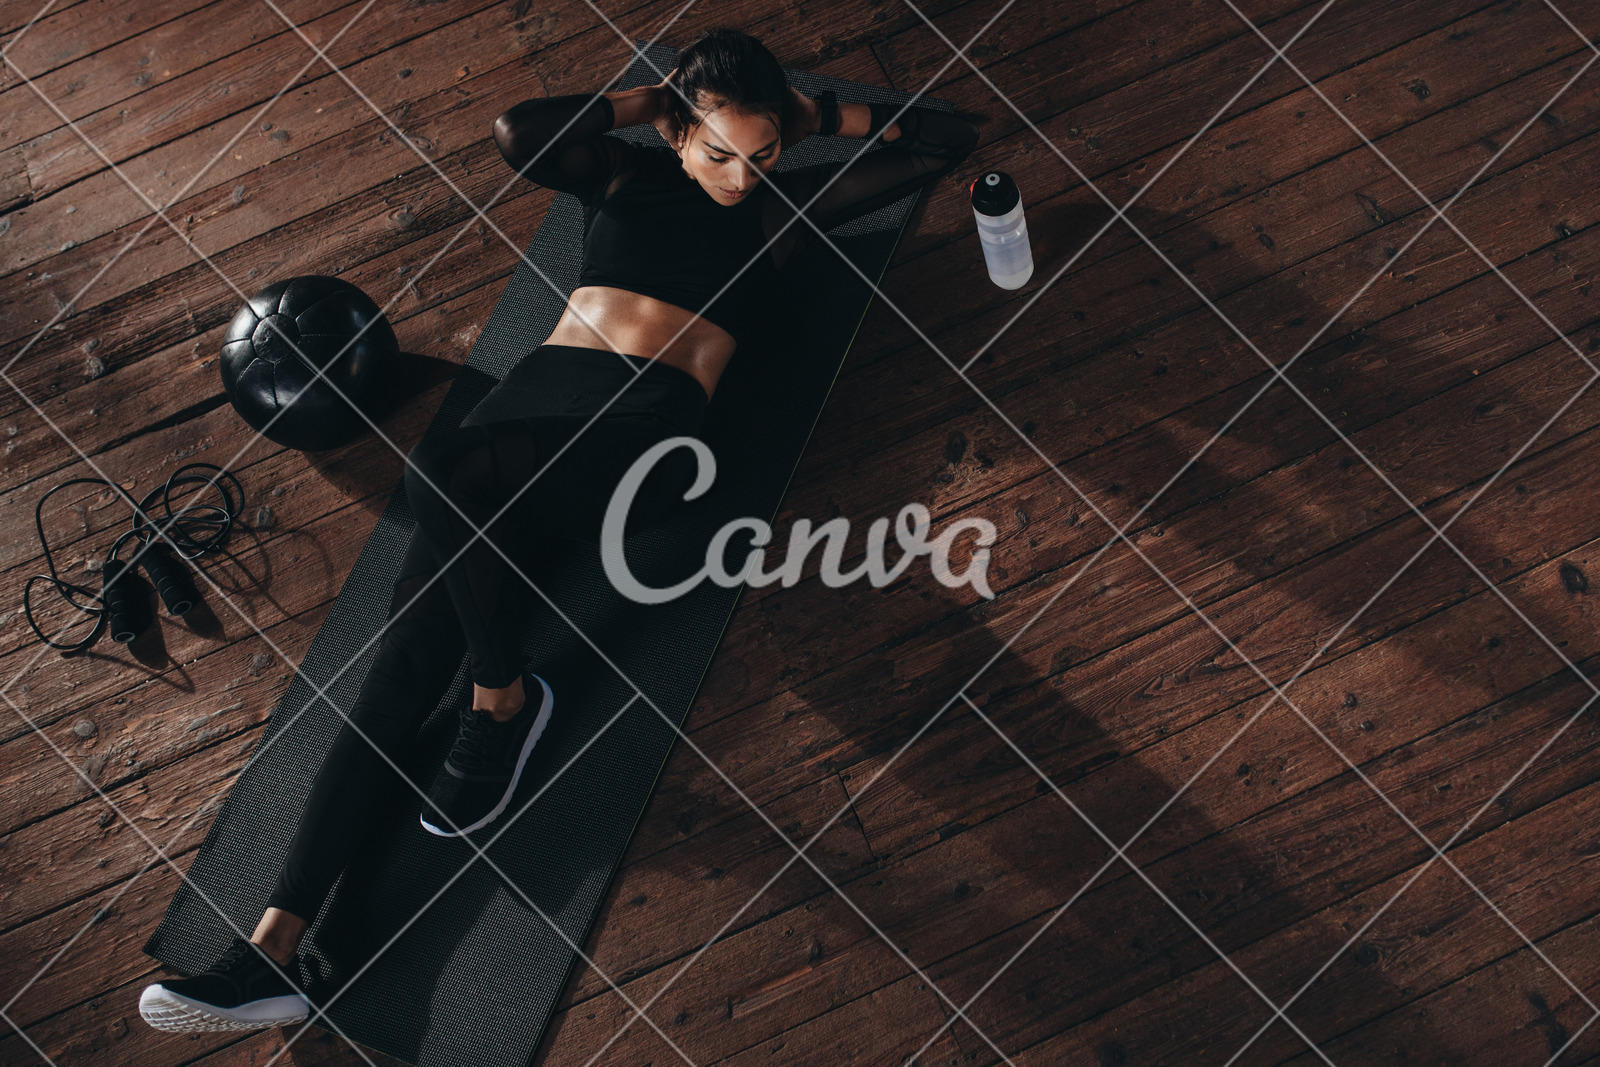 Female Doing Abs Workout At The Gym Photos By Canva